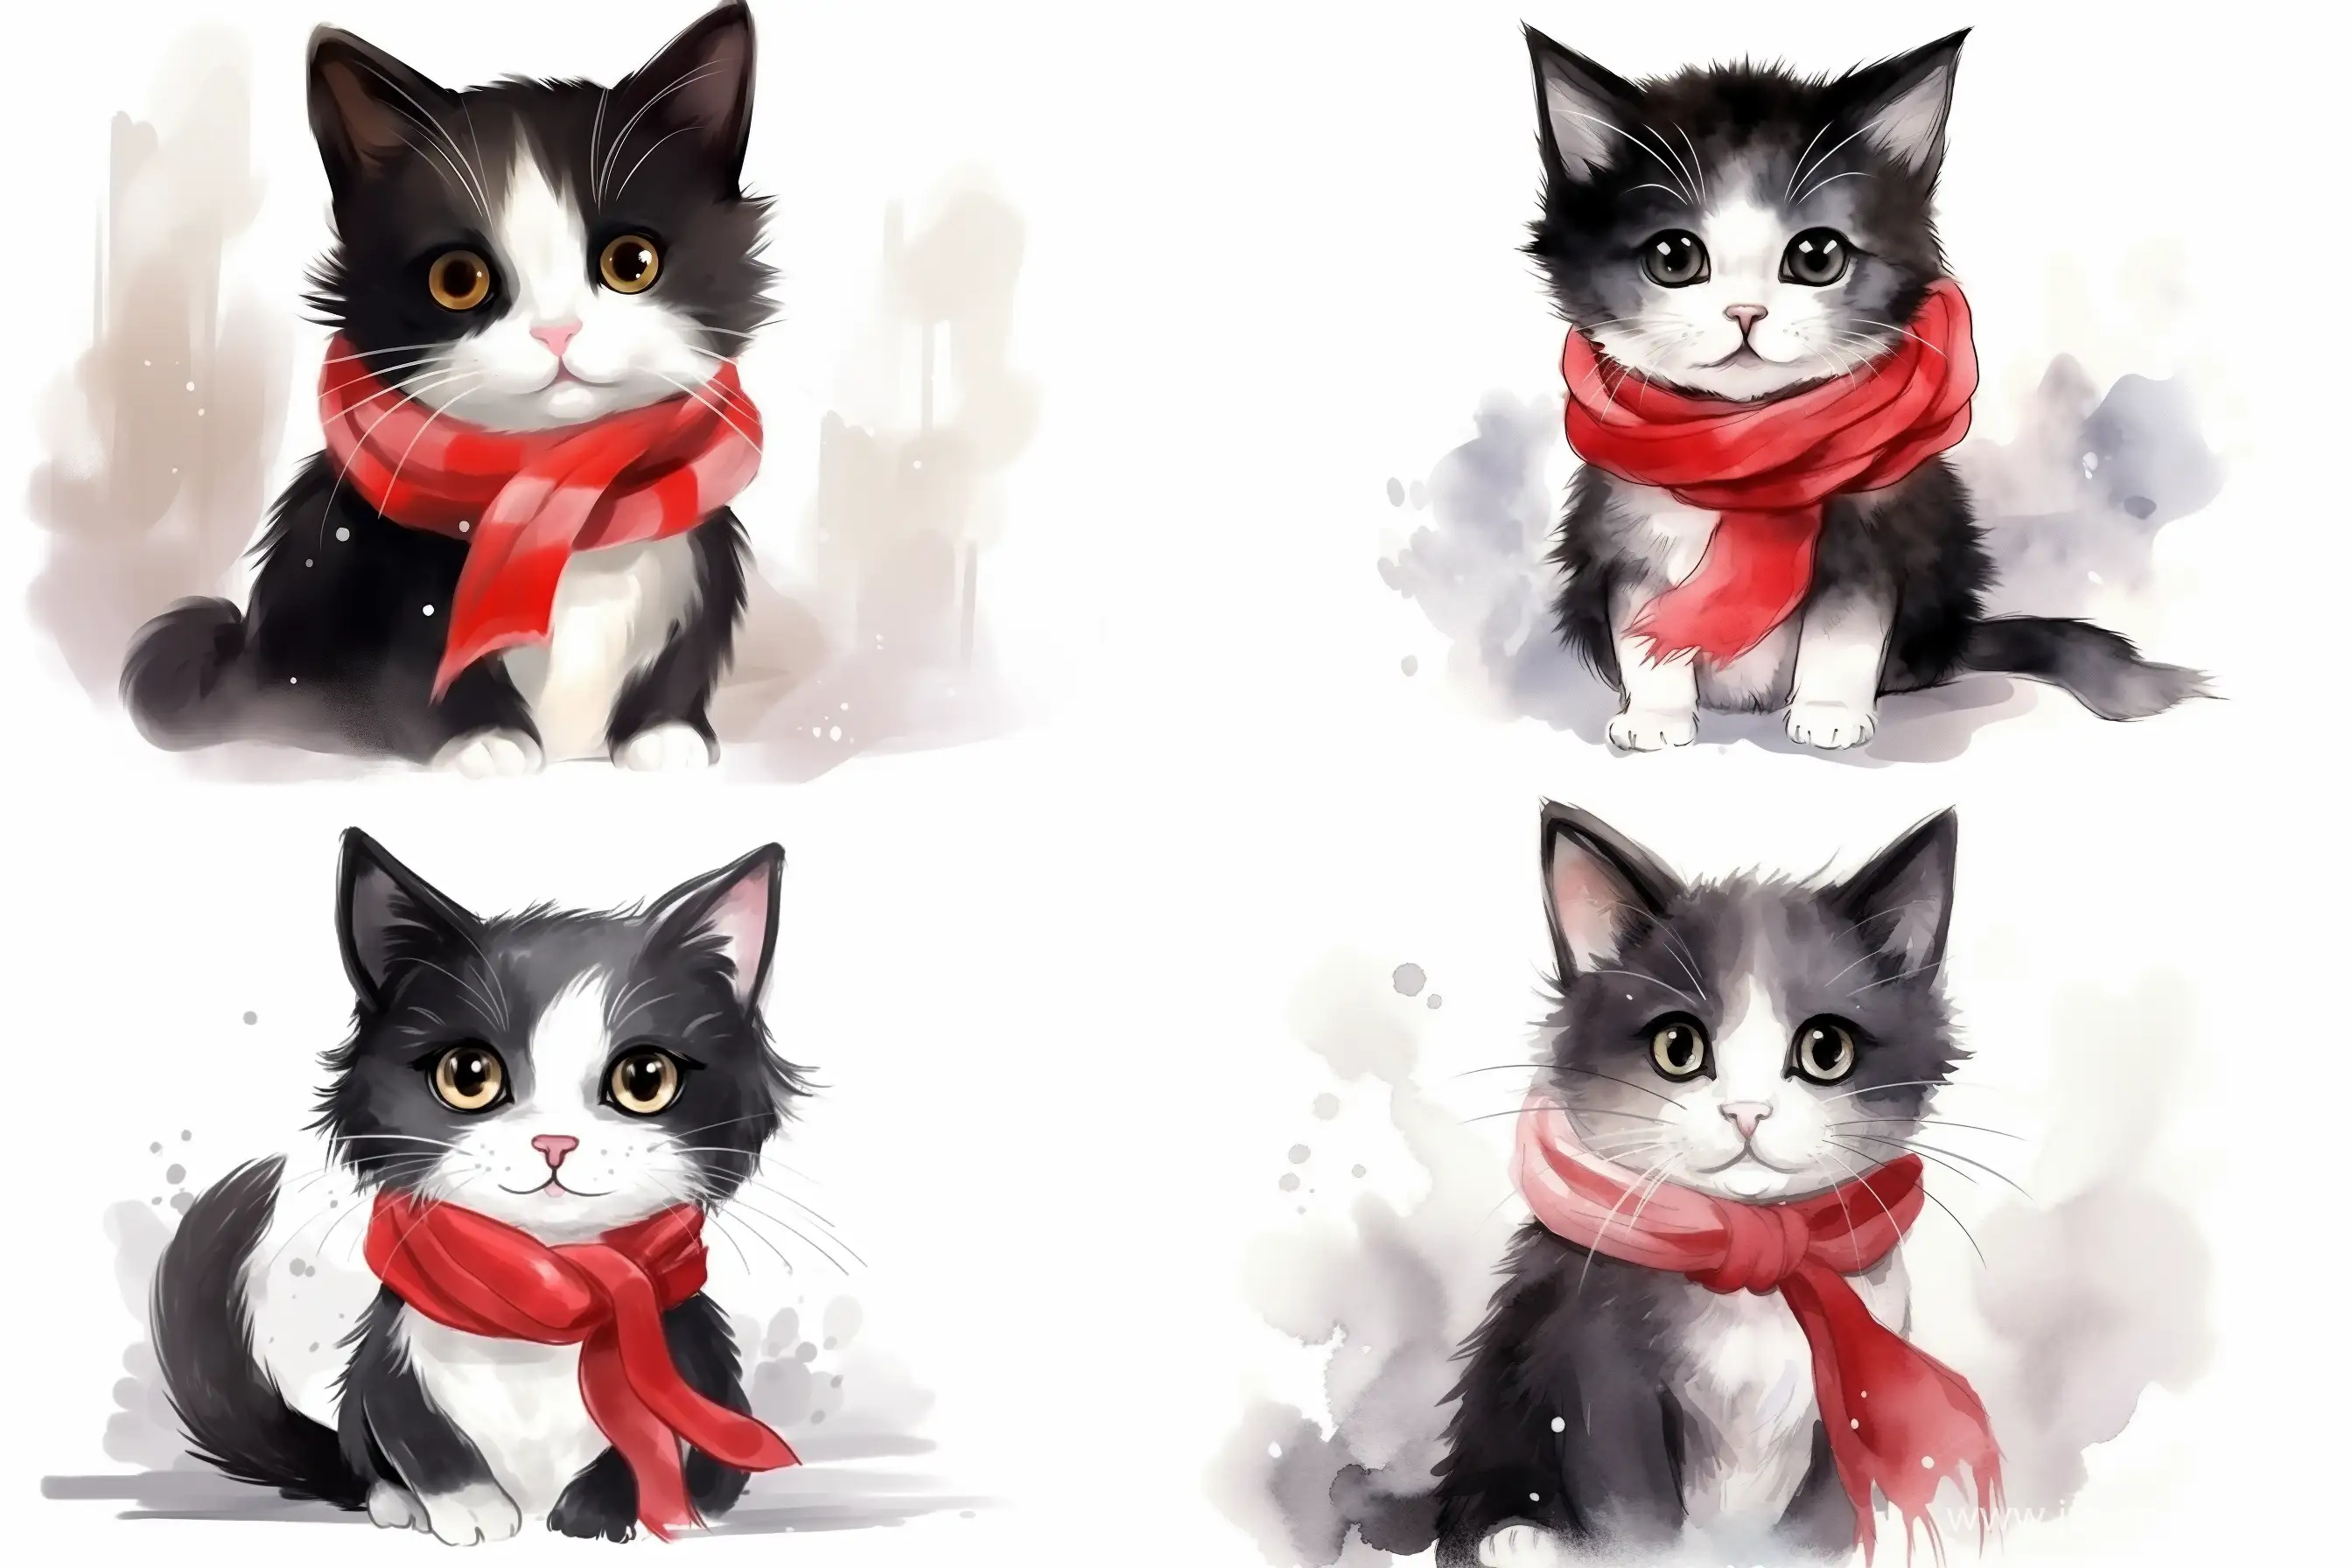 Adorable-Black-and-White-Cartoon-Baby-Cat-Portrait-with-Red-Scarf-on-White-Background